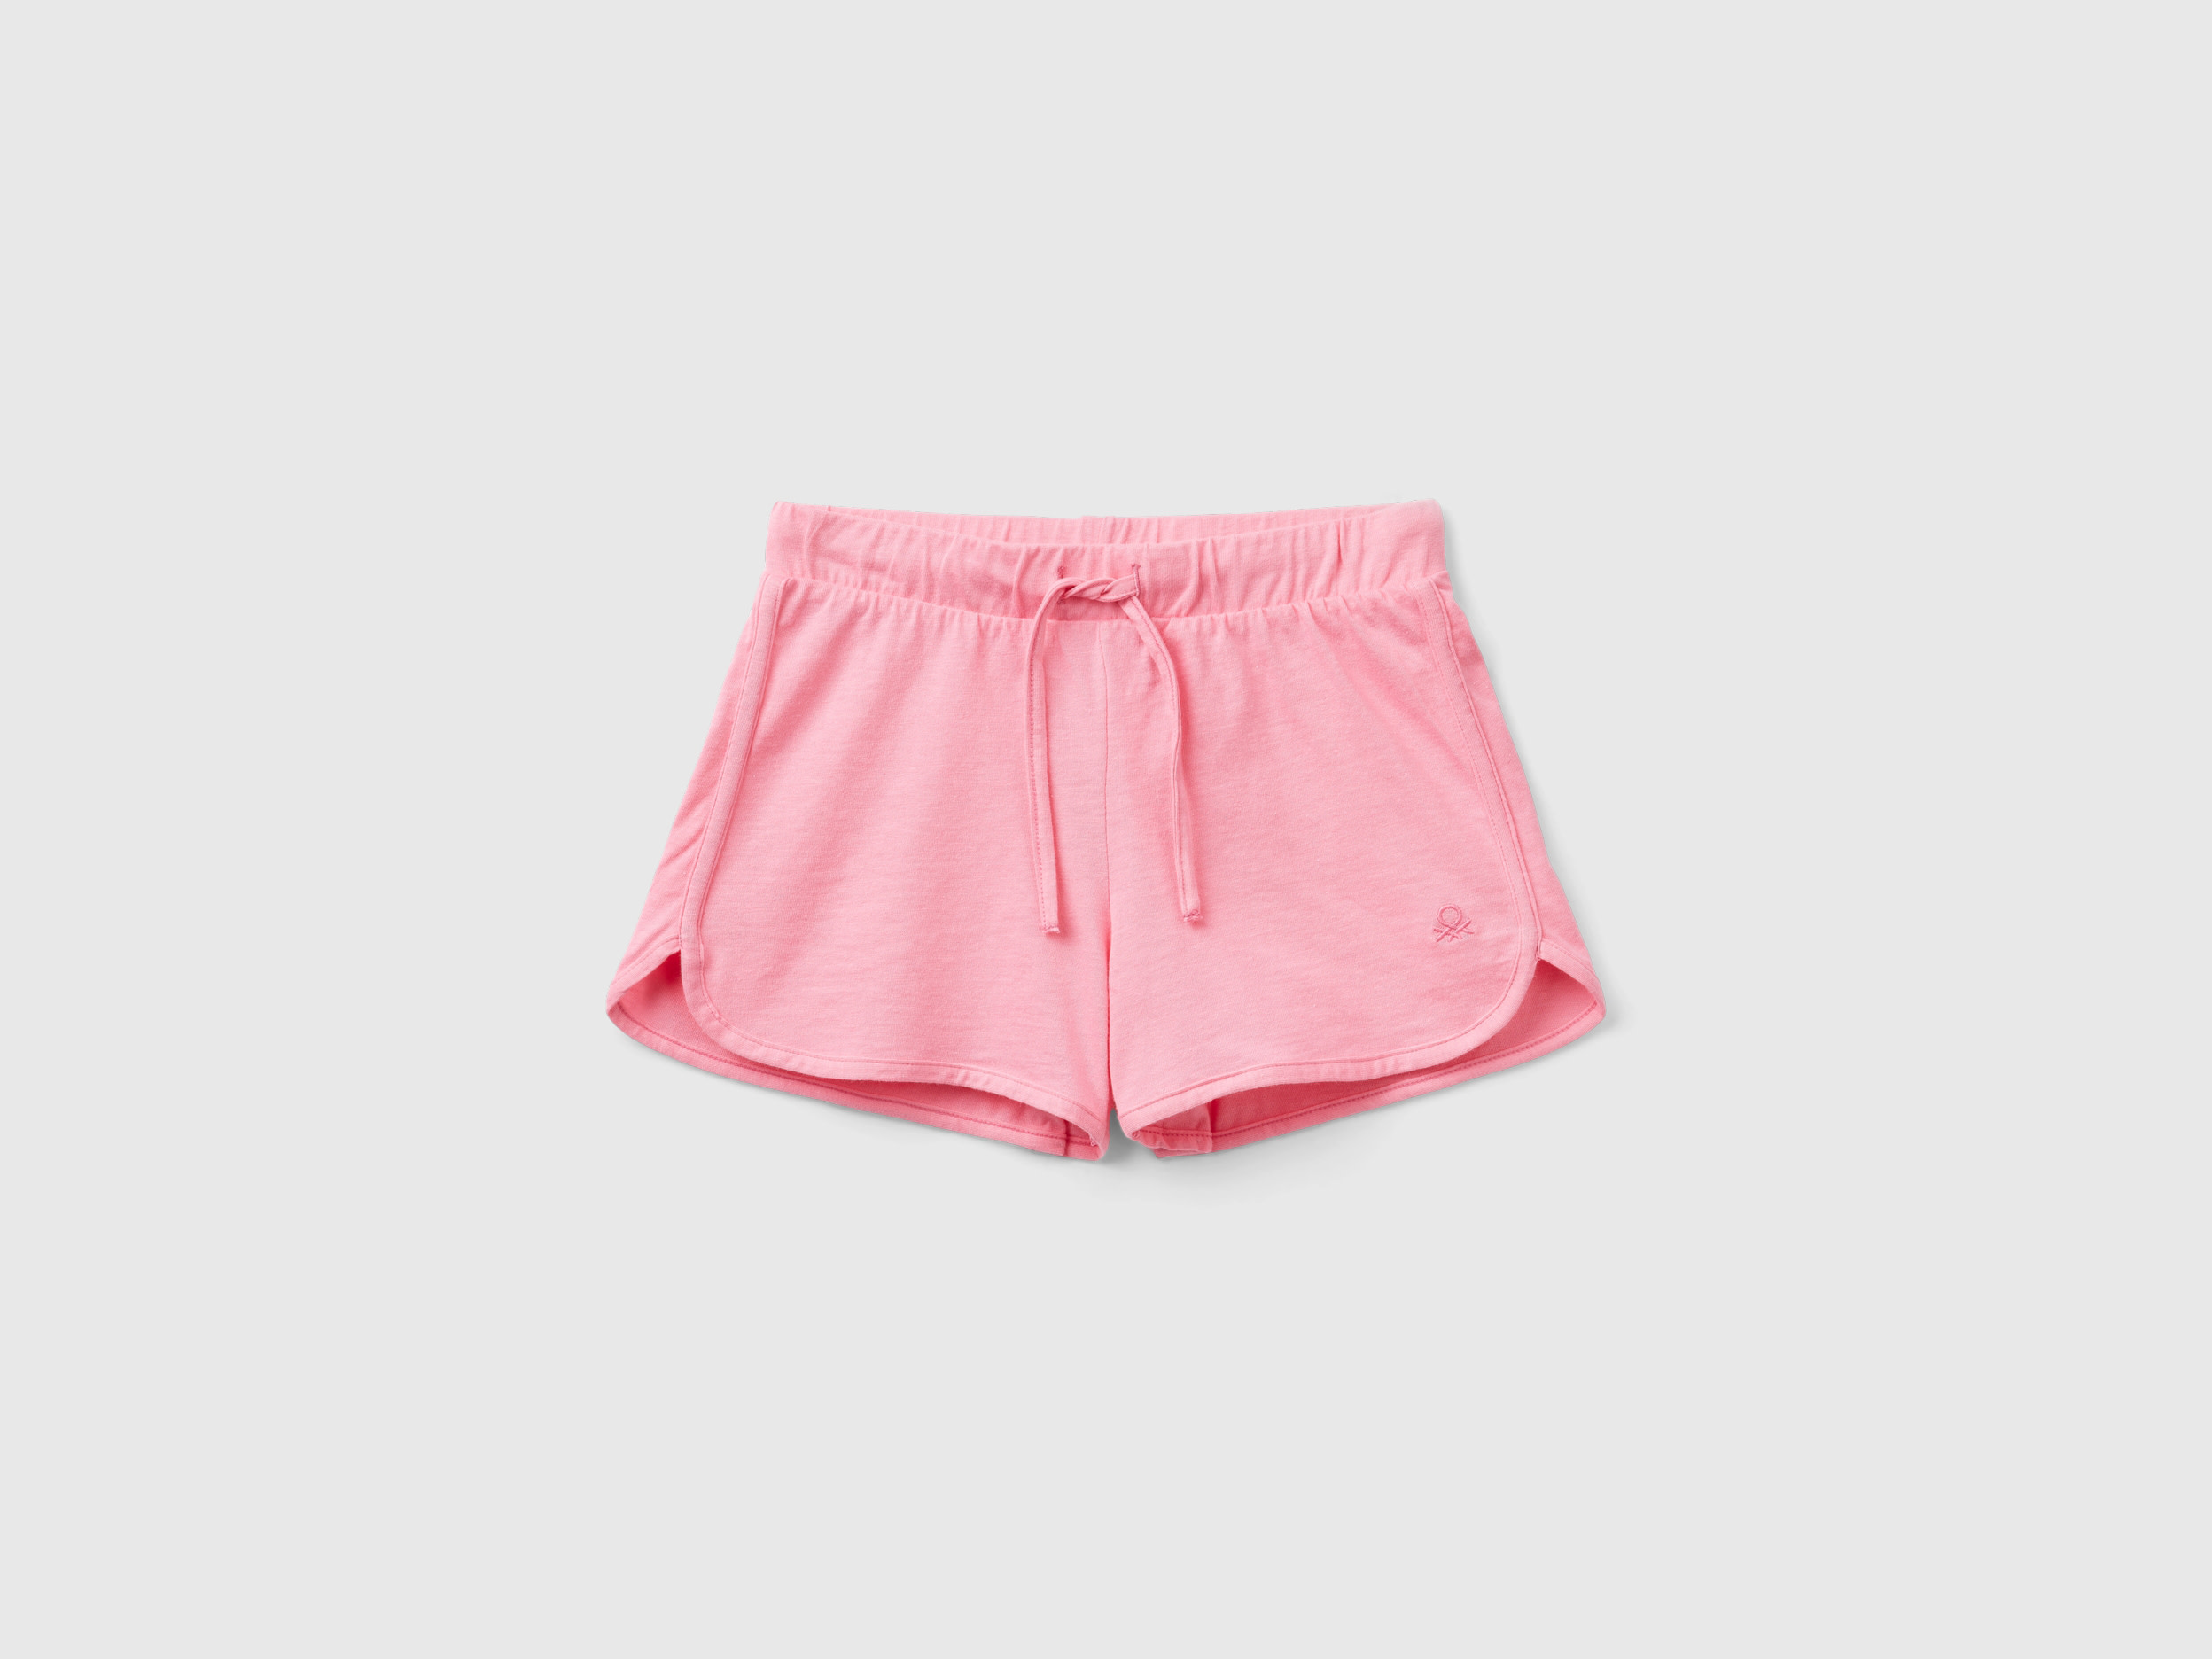 Image of Benetton, Runner Style Shorts In Organic Cotton, size 3XL, Pink, Kids